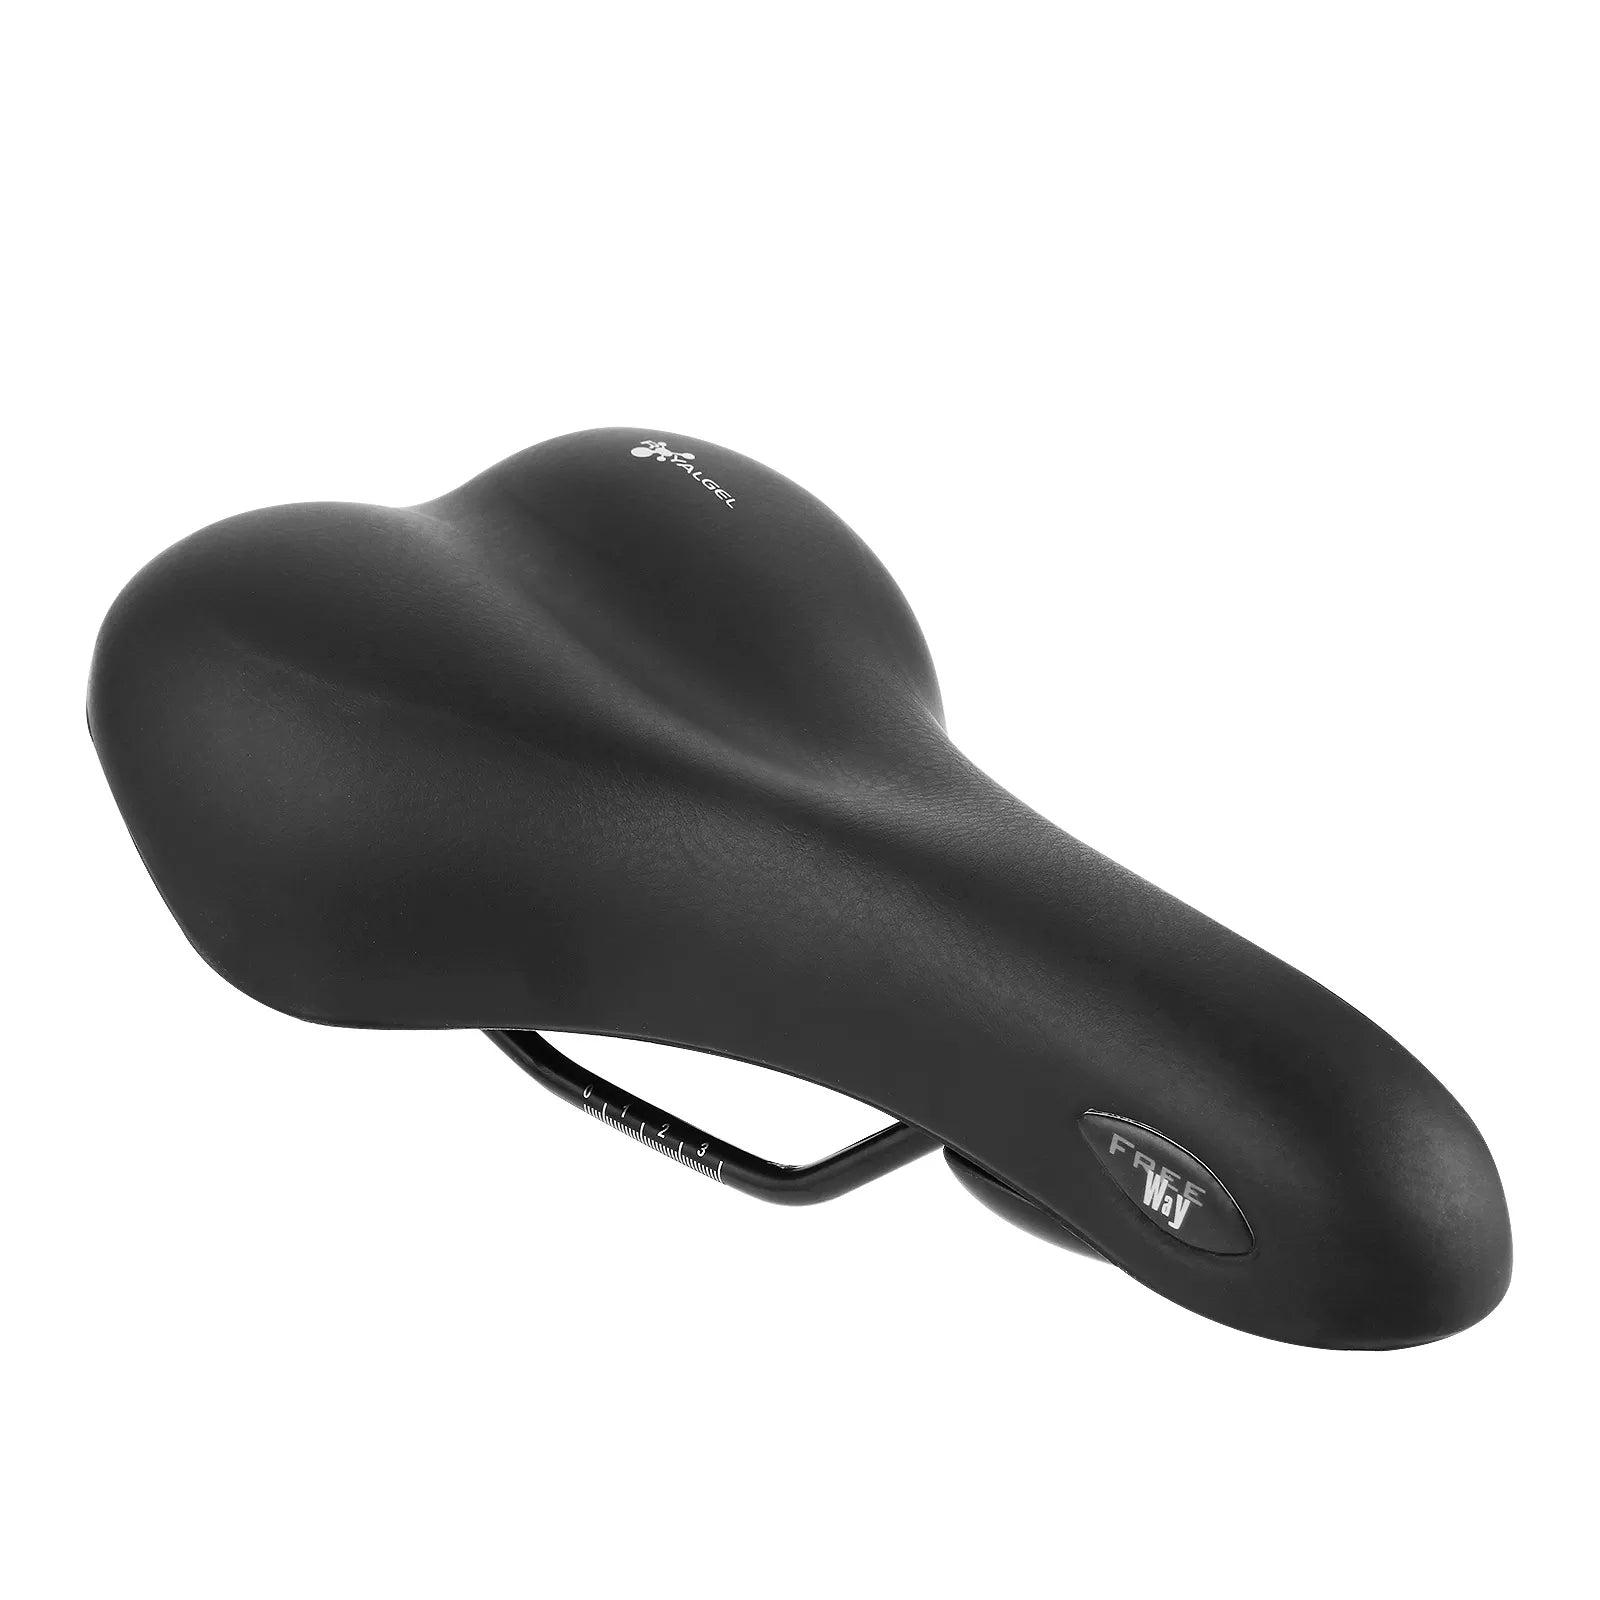 Vanpowers Manidae ebike Comfort Saddle - Featuring high-quality polyurethane and SELLE ROYAL design, this saddle provides superior comfort by adapting to your body and ensuring a more uniform weight distribution.